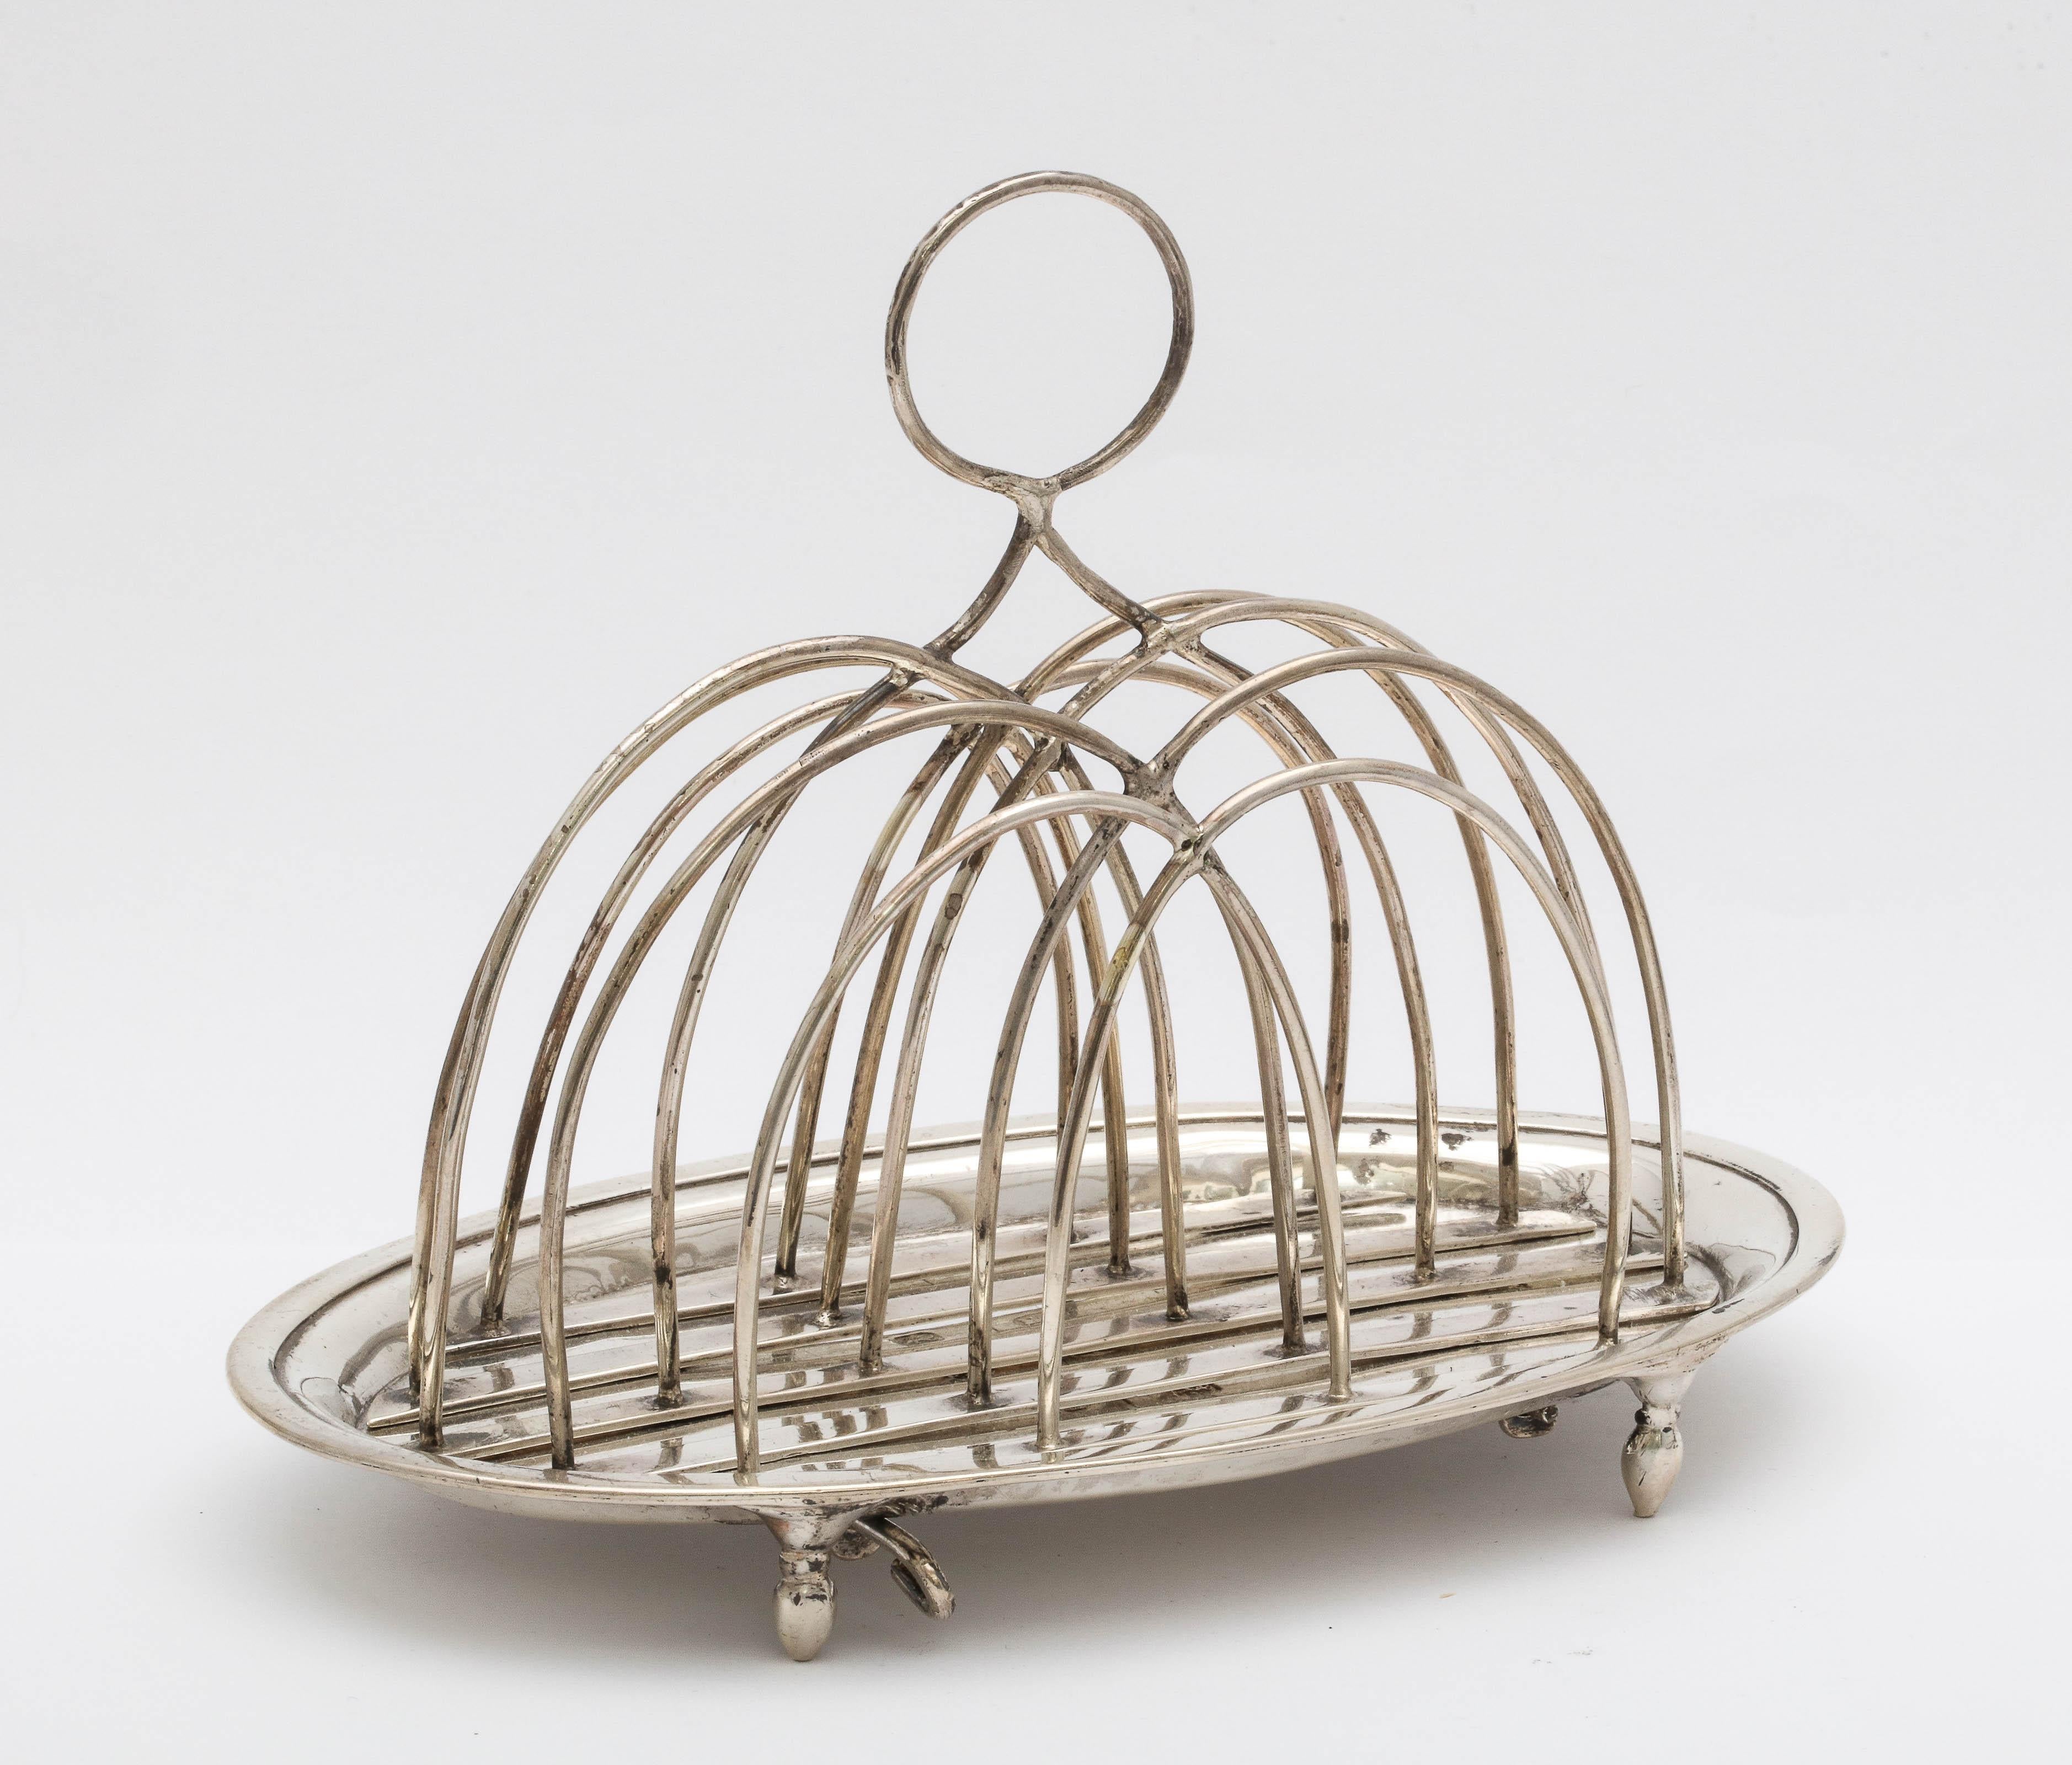 Georgian (George III), sterling silver, footed toast rack, London, 1784, Barrage Davenport - maker. Measures 5 inches to top of handle x 6 inches wide x 3 3/4 inches deep. Silver wire separators are removable for cleaning (see photos of underside of